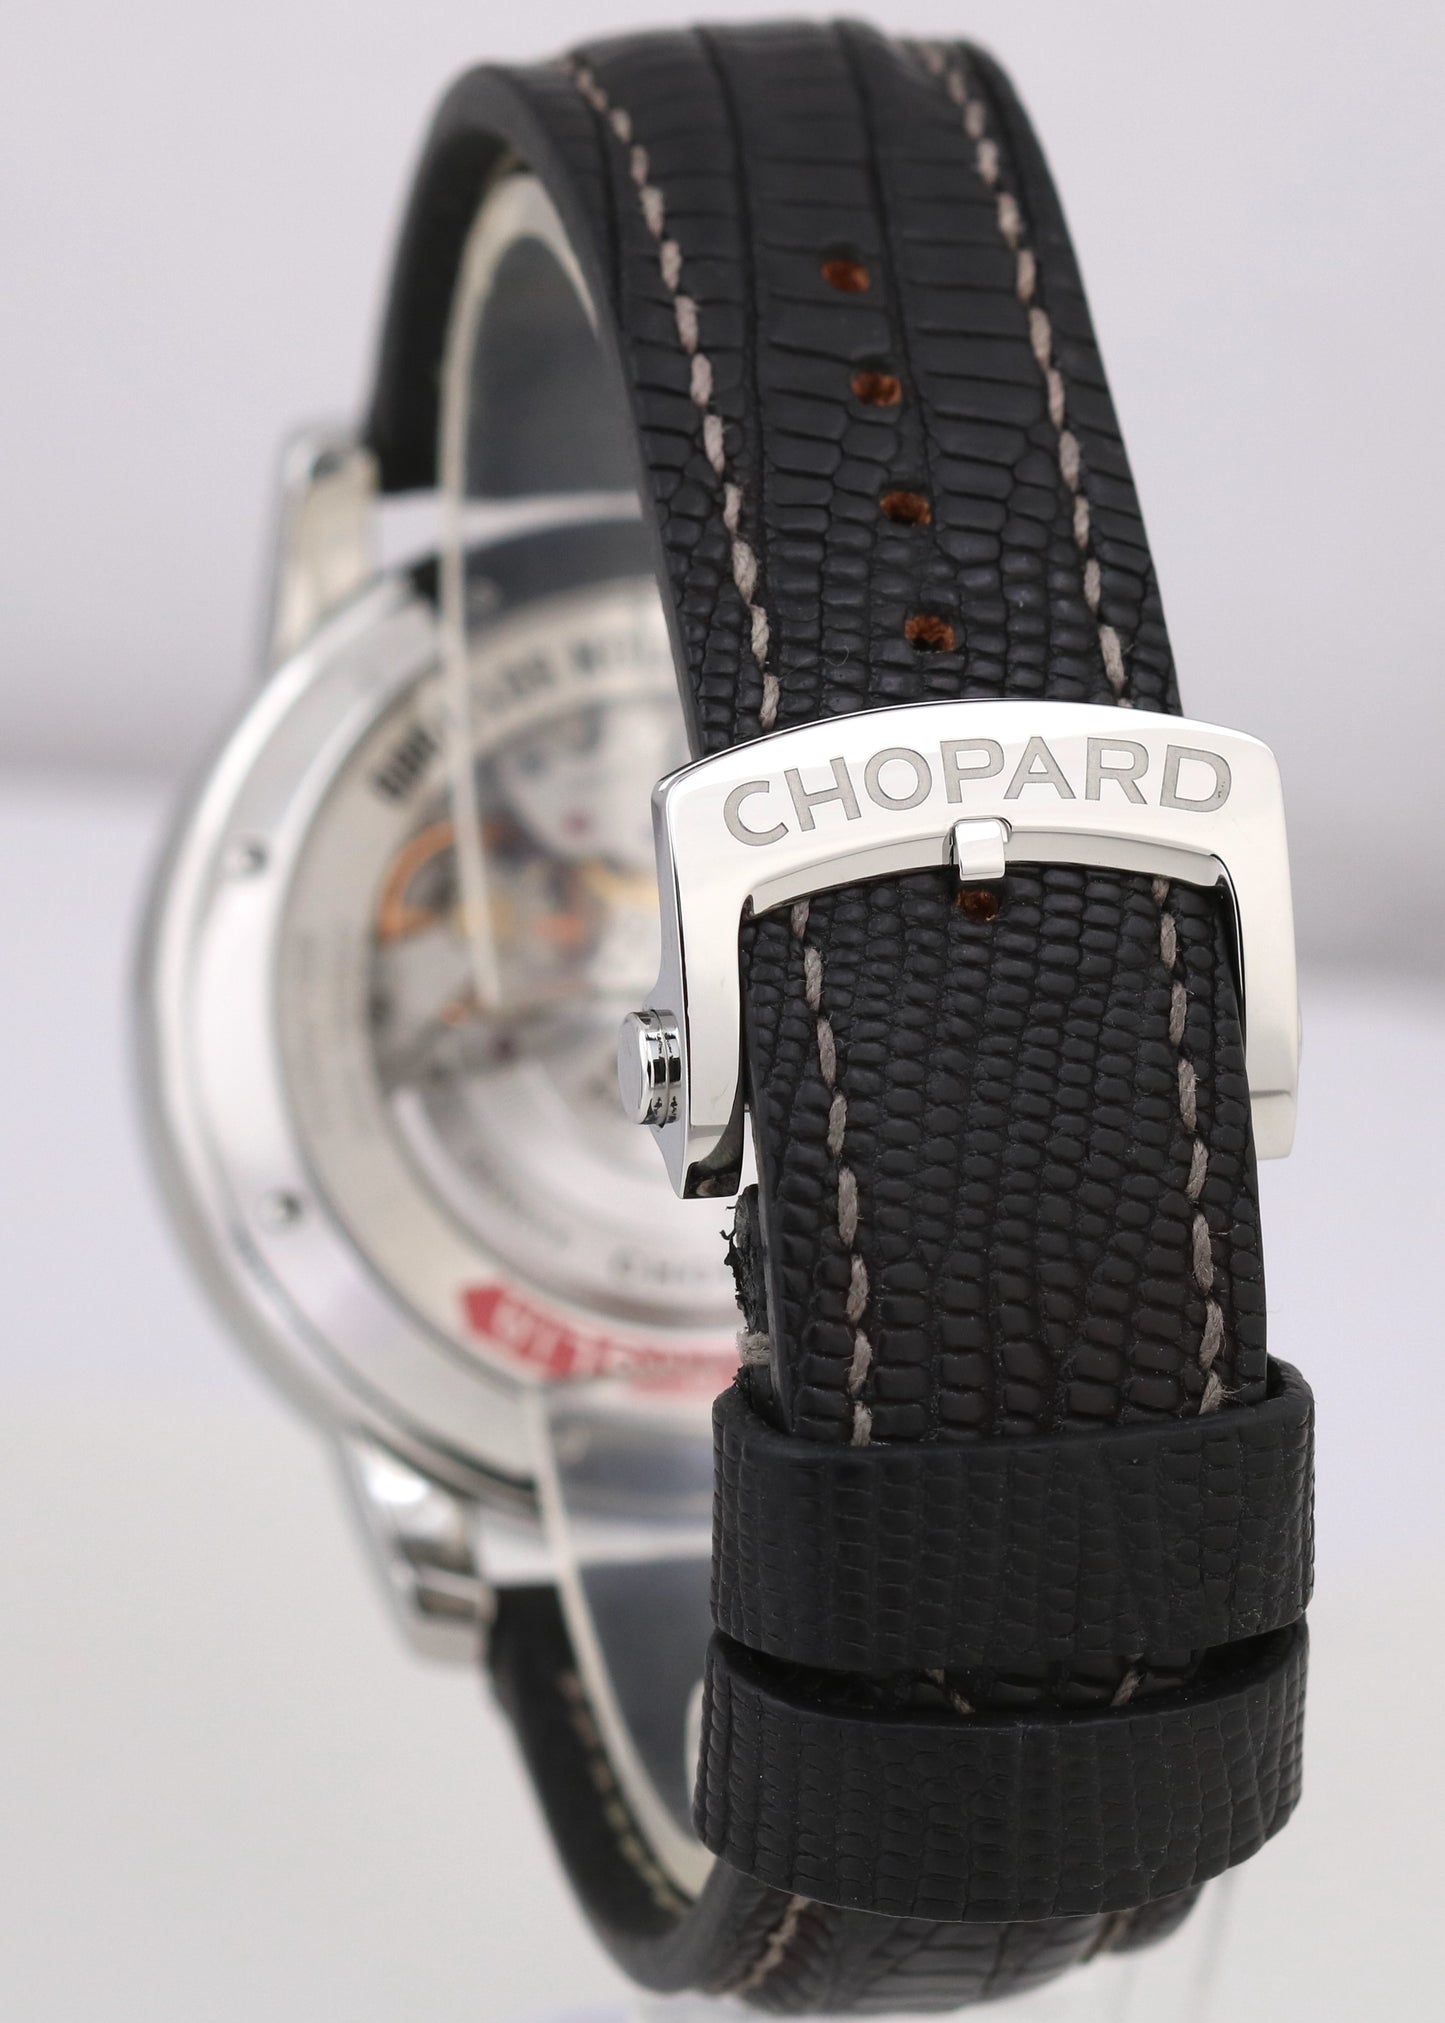 MINT Chopard Mille Miglia Race Edition Chronograph 168580-3001 46mm Steel Watch